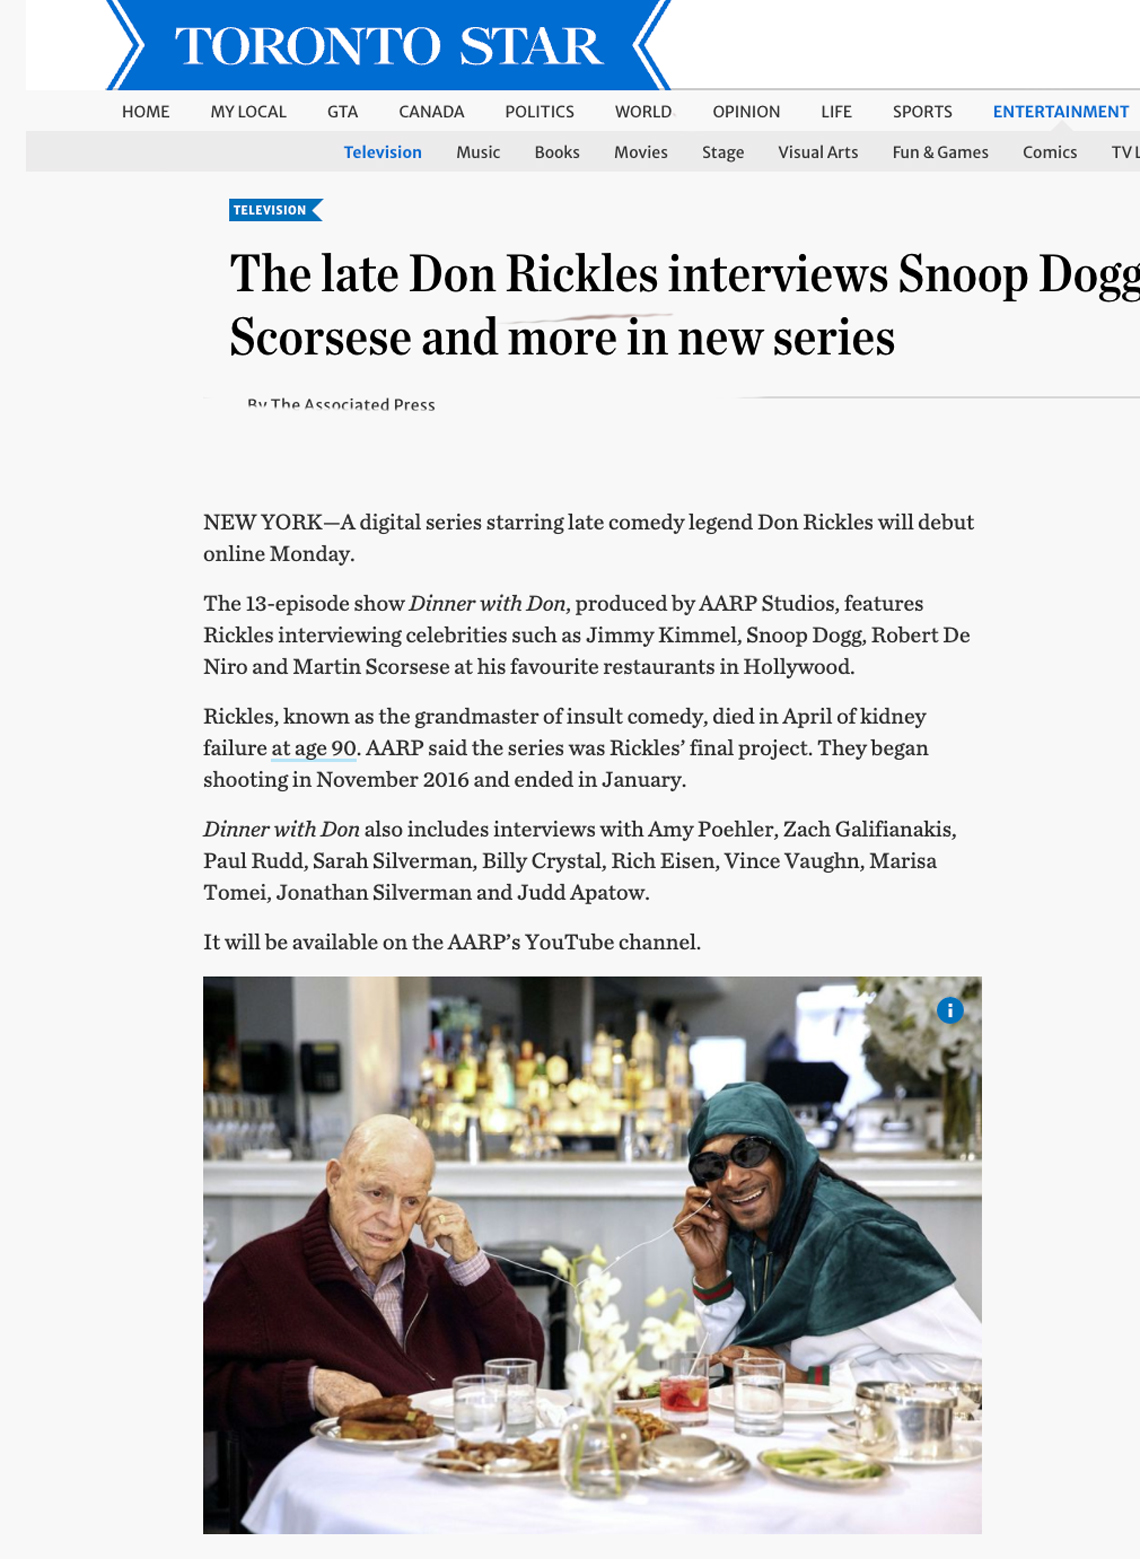 Dinner_with_don aarp_dinner_with_don Don_rickles Snoop_Dogg_don_rickles snoop_dogg snoop